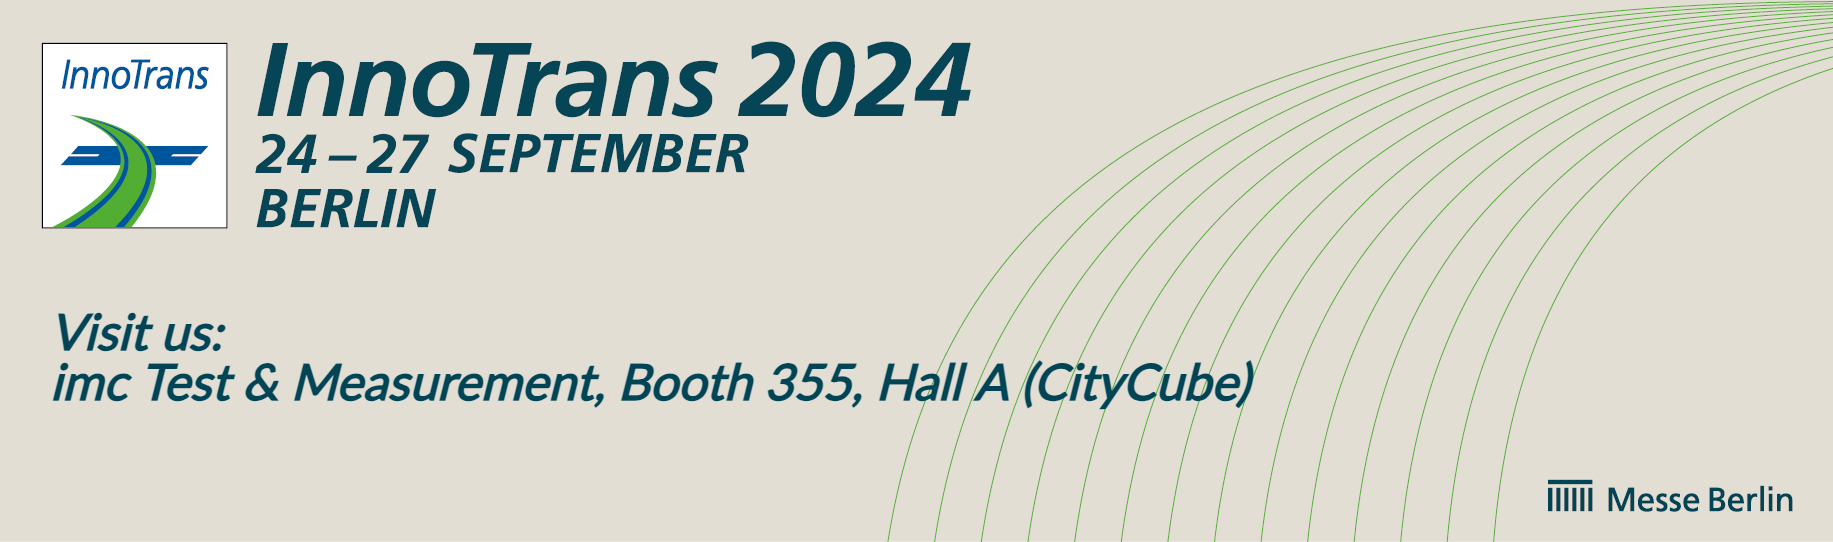 Vist us at Innotrans 2024 at booth 355 in Hall A.